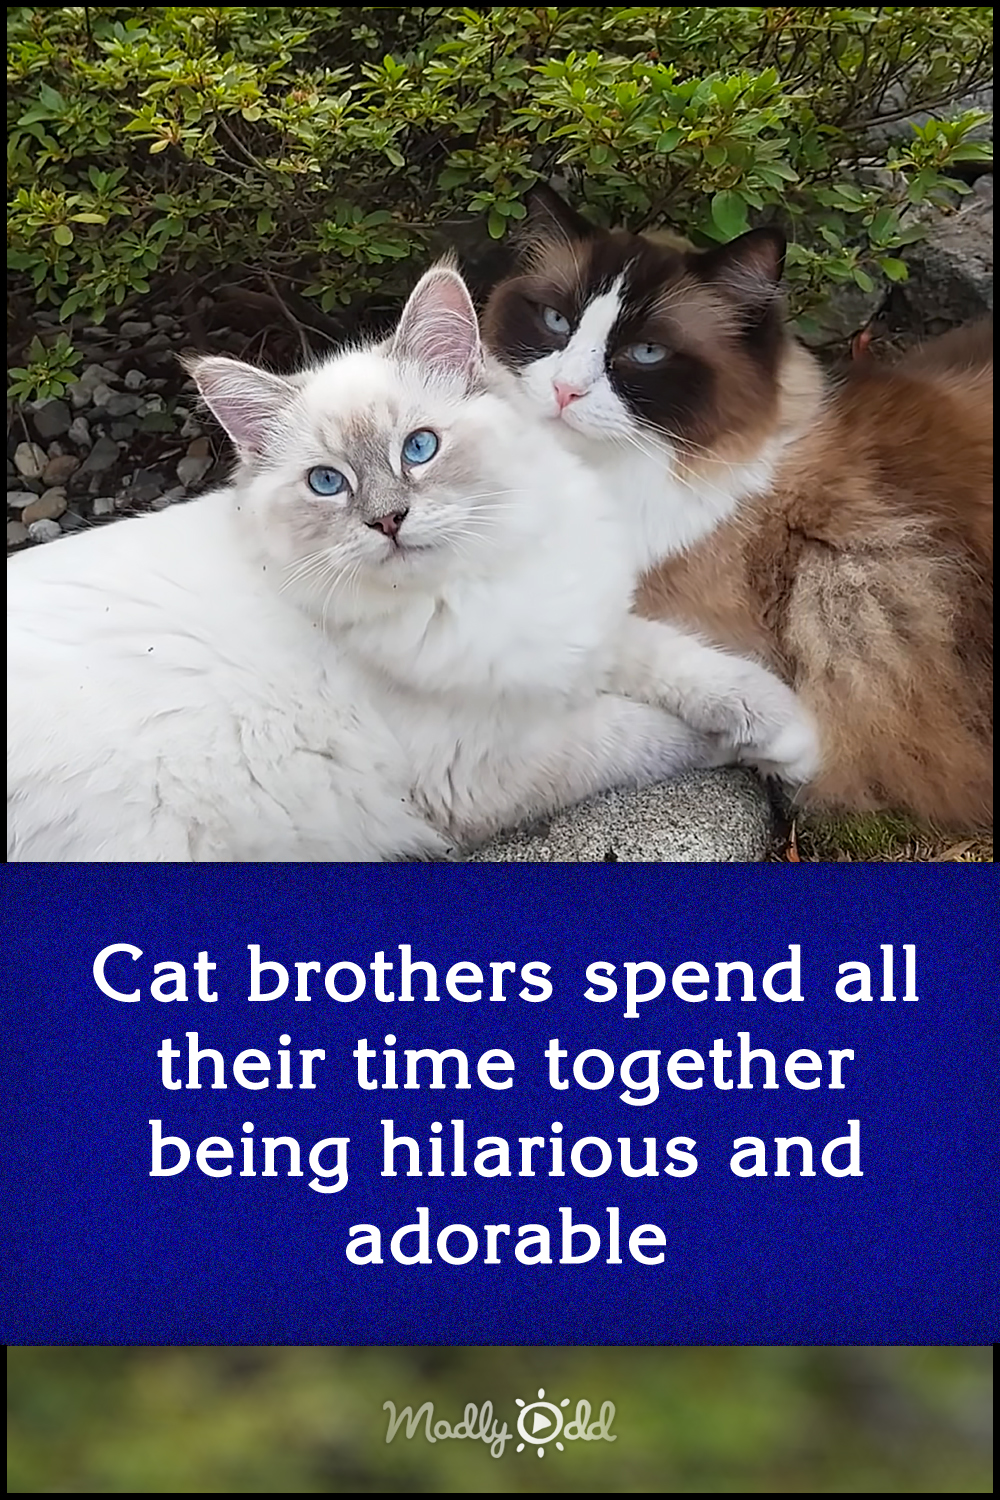 Cat brothers spend all their time together being hilarious and adorable